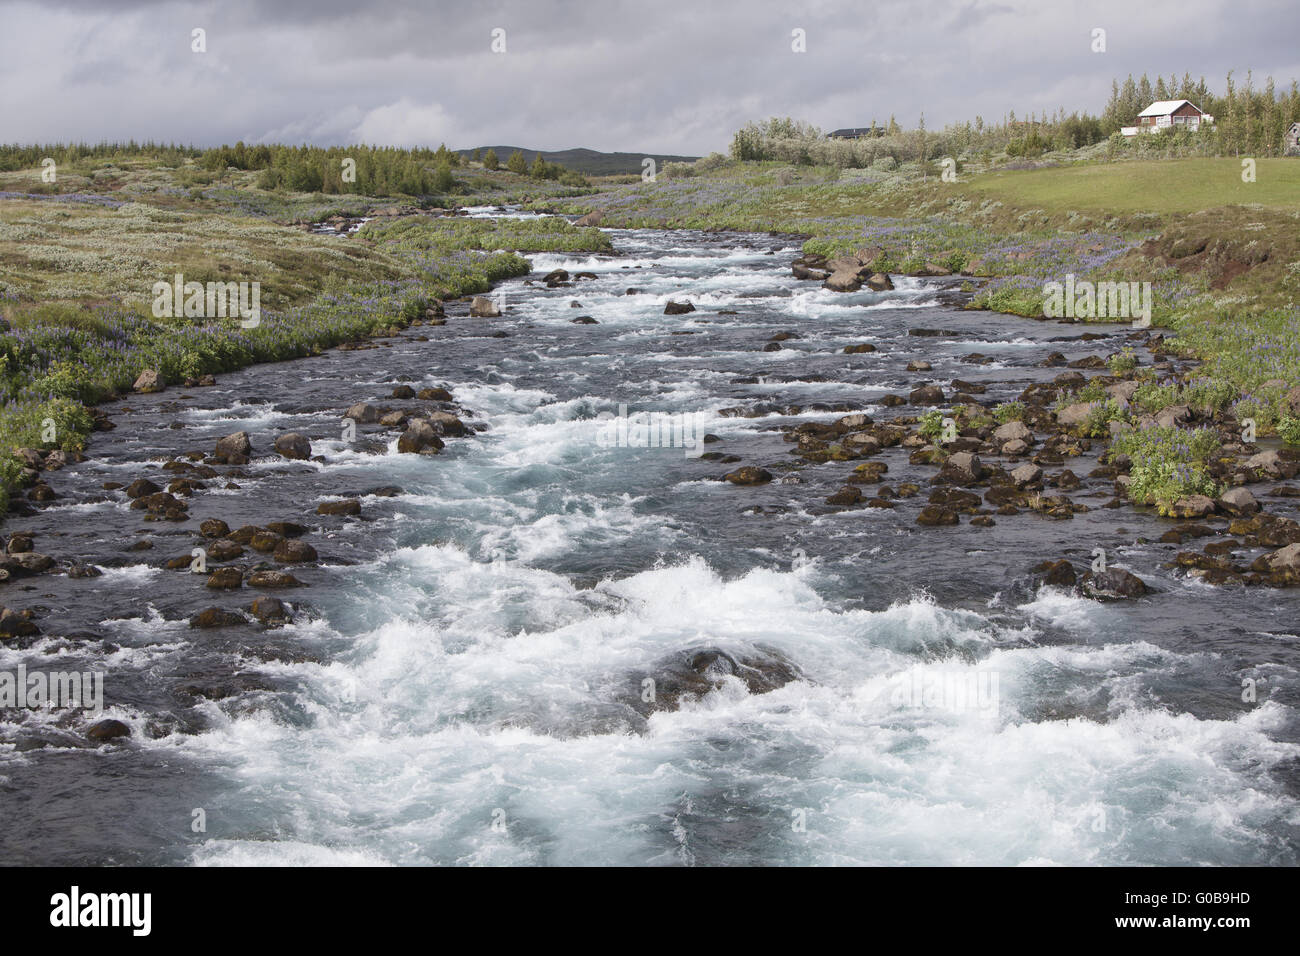 Powerful river, Iceland Stock Photo